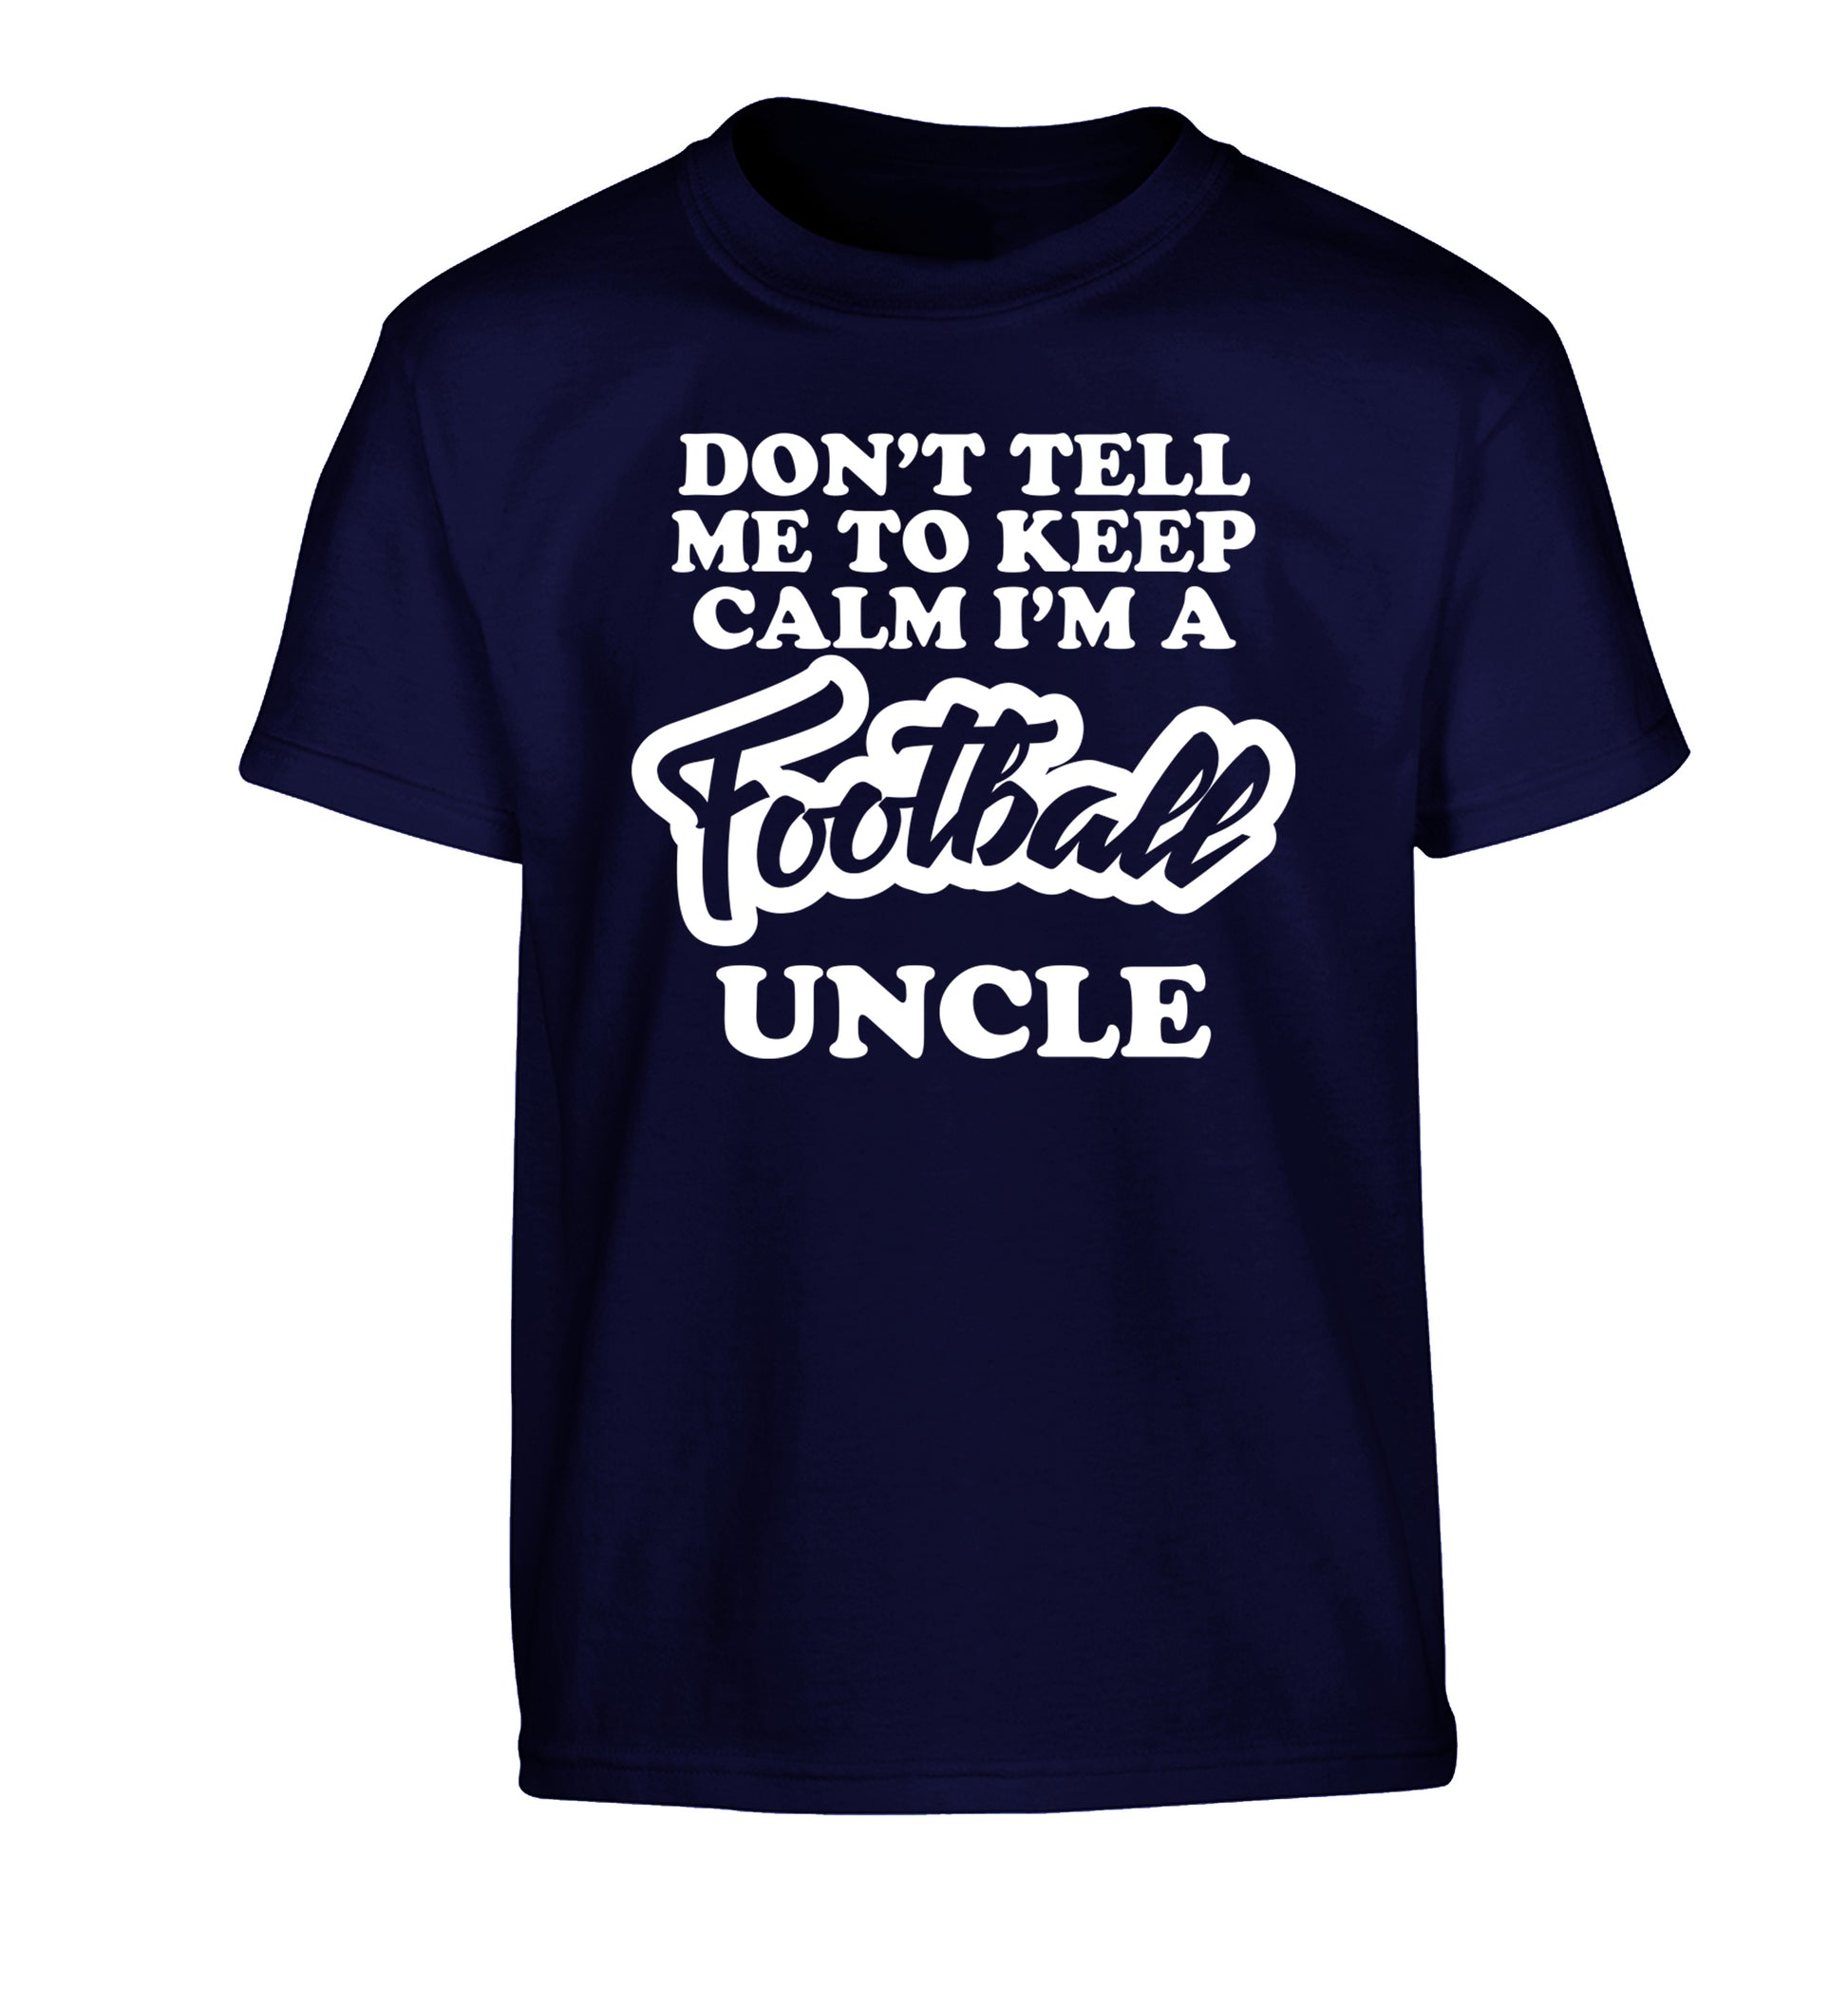 Don't tell me to keep calm I'm a football uncle Children's navy Tshirt 12-14 Years